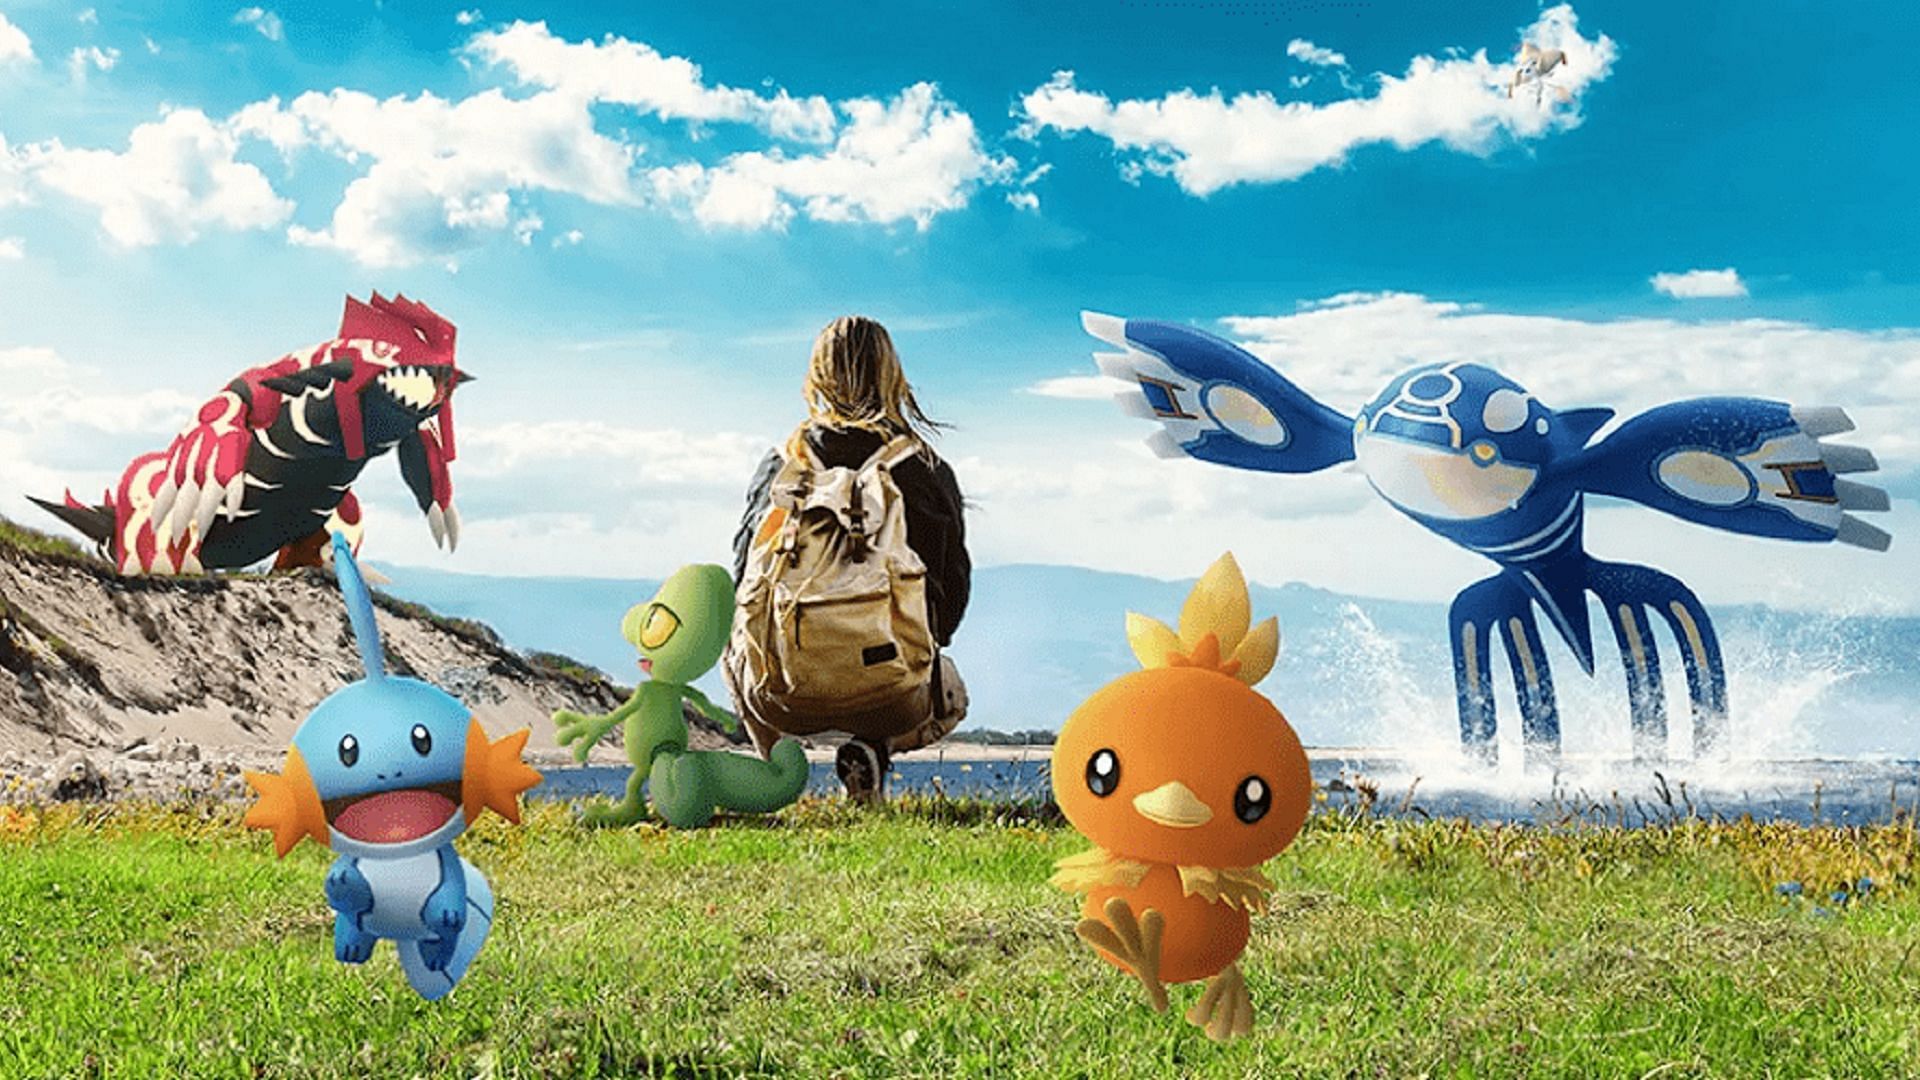 The primal forms of Groudon and Kyogre are the centerpieces of teams Ruby and Sapphire (Image via Niantic)